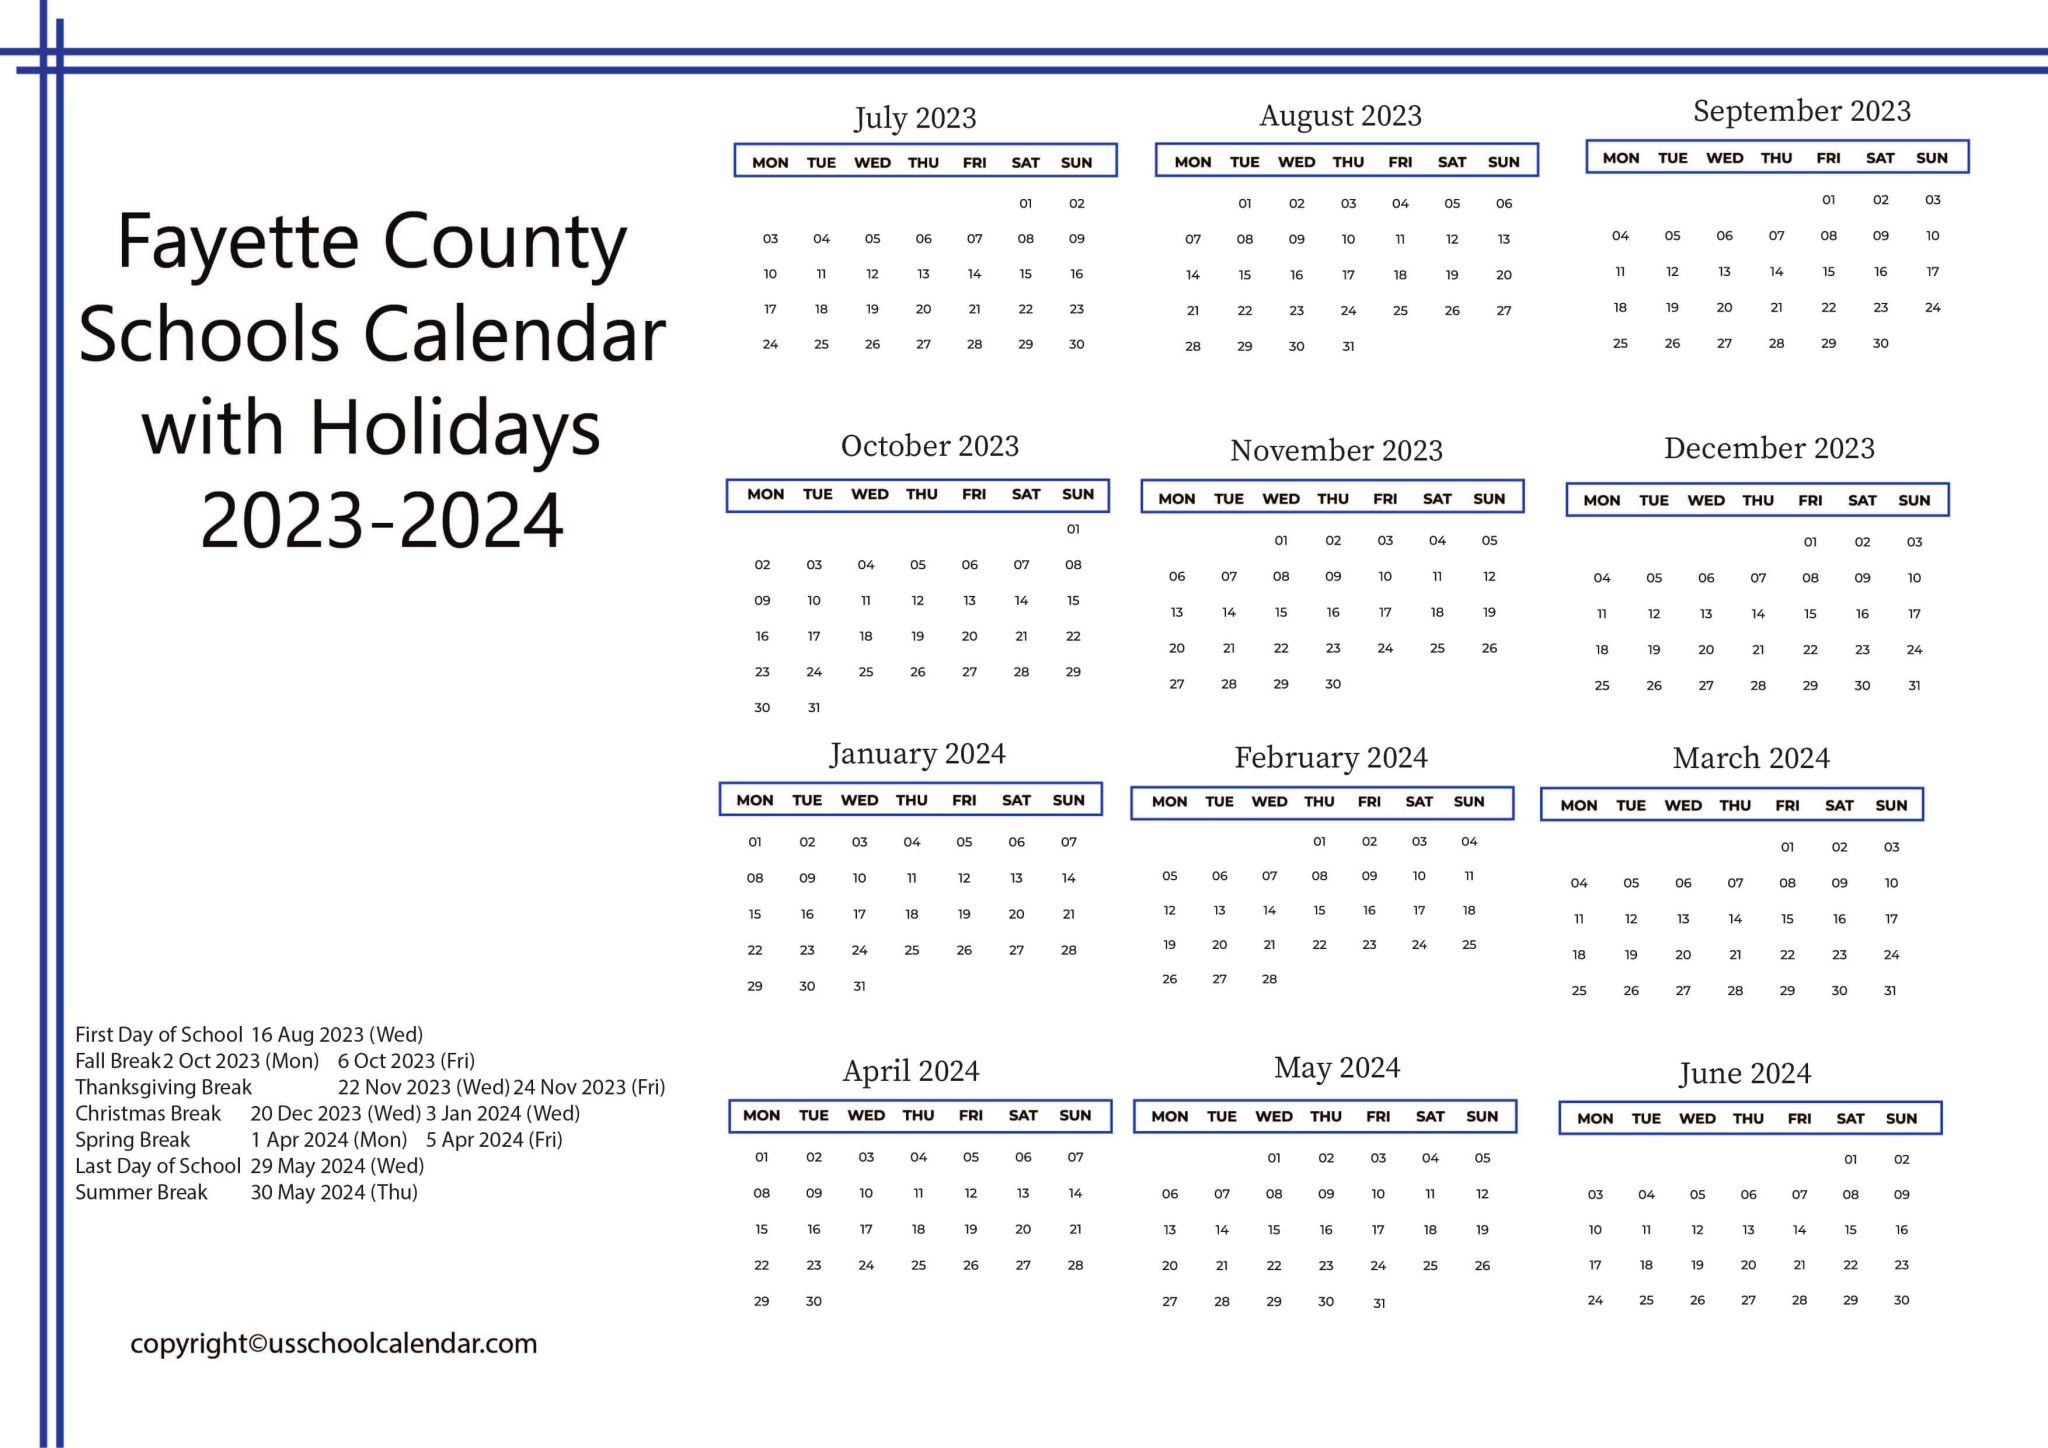 fayette-county-schools-calendar-with-holidays-2023-2024